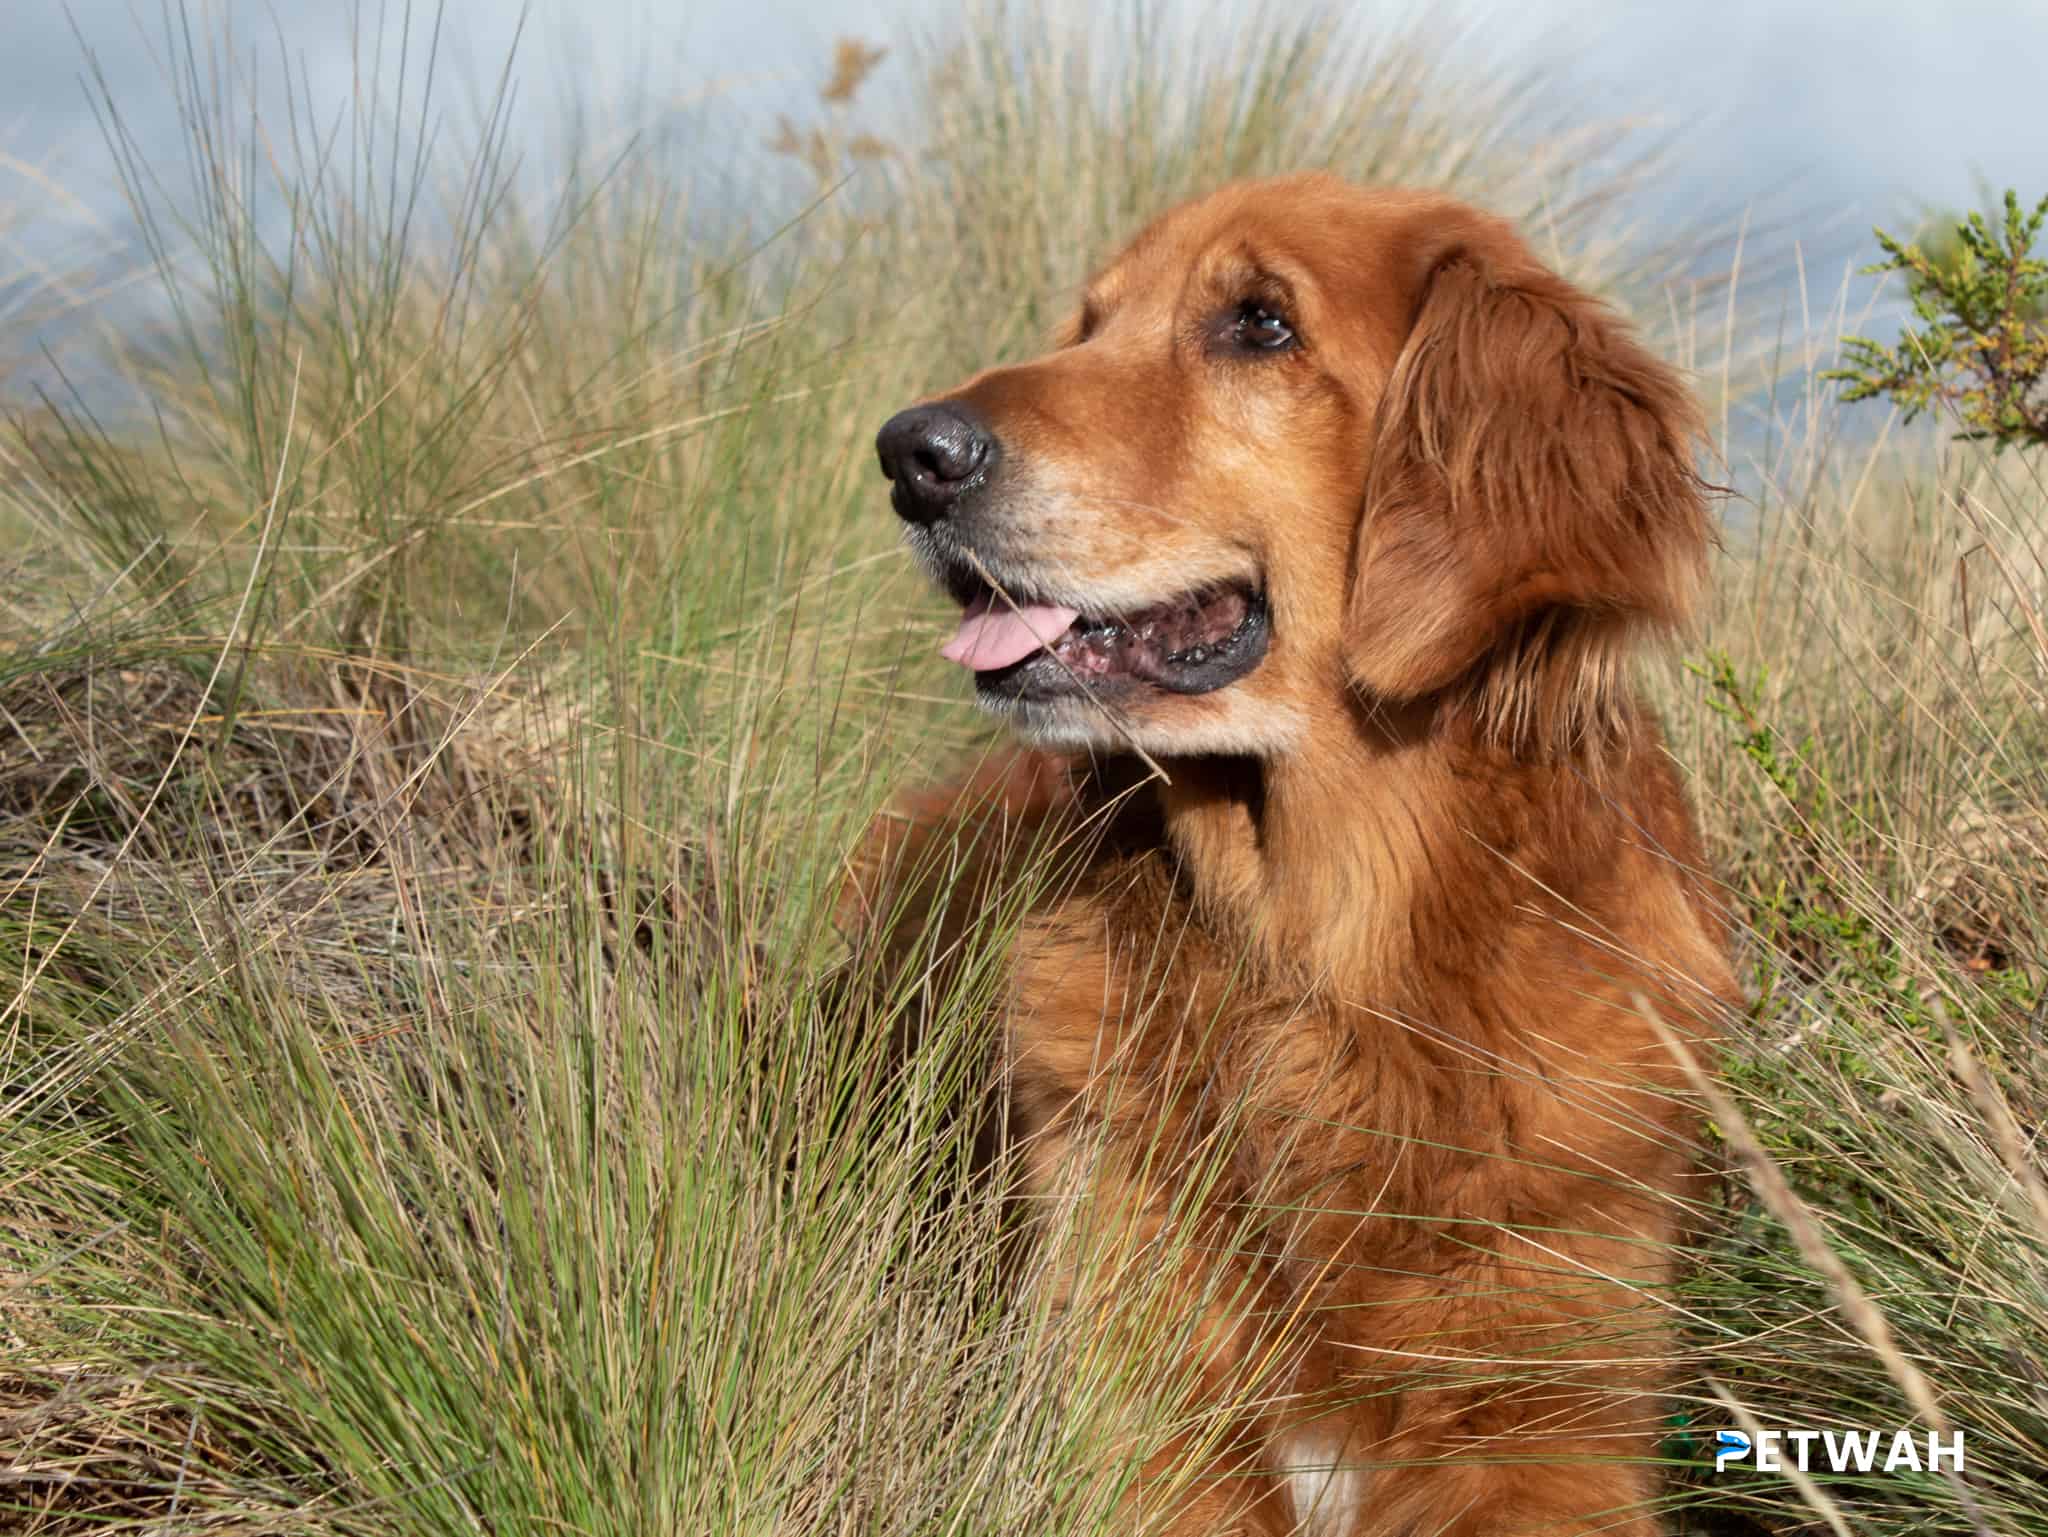 The Maturing Process: From Hyperactive Puppies to Calm Adult Golden Retrievers